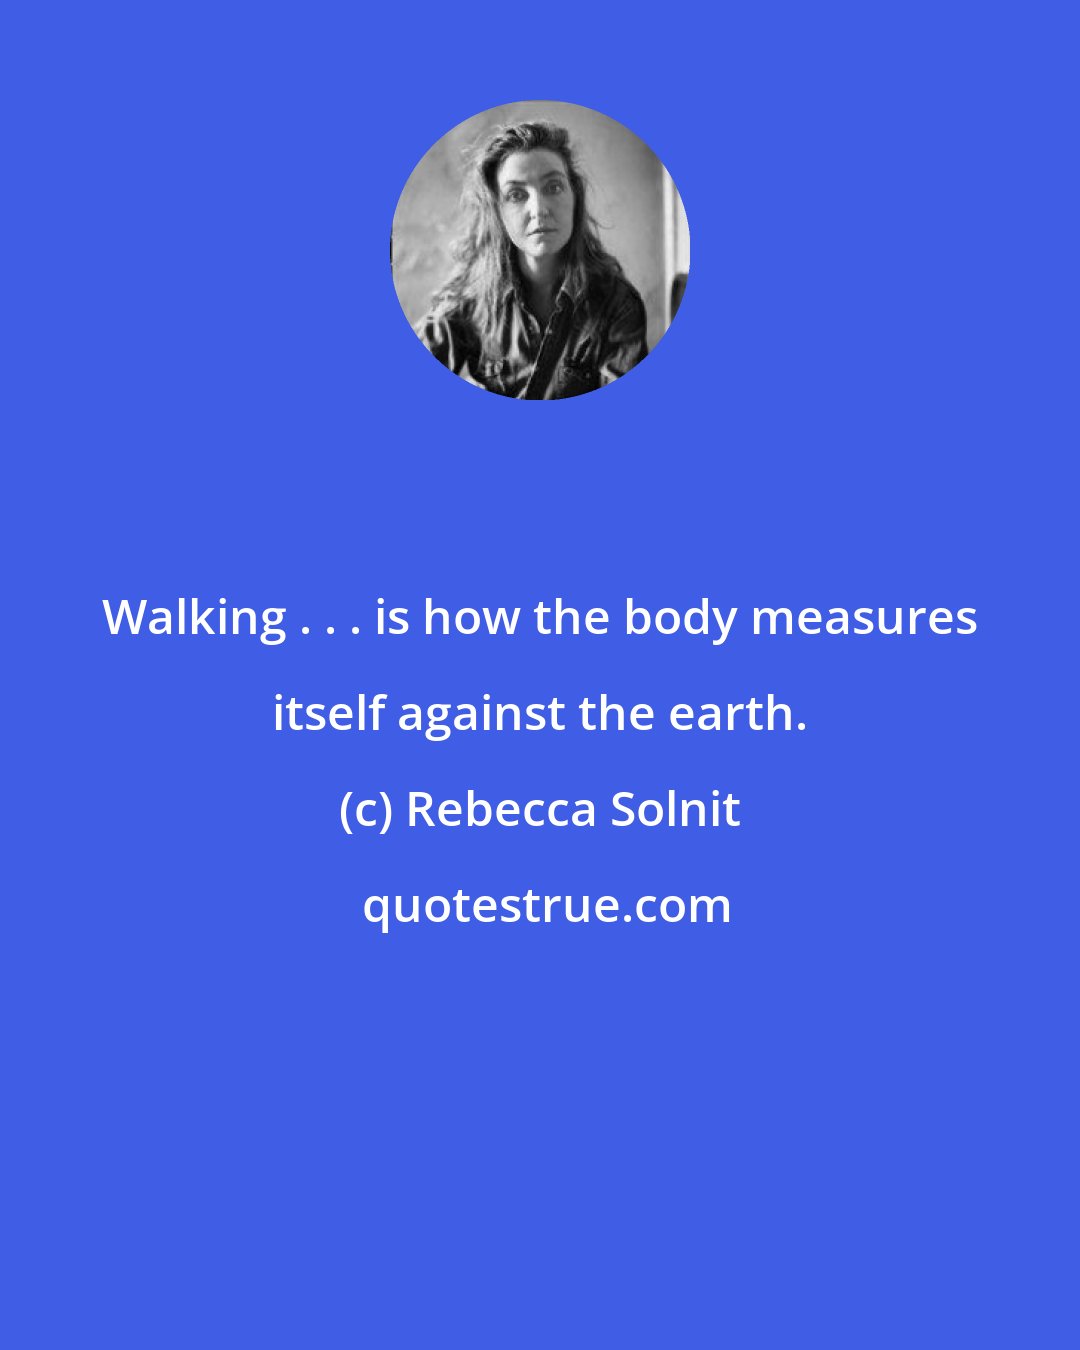 Rebecca Solnit: Walking . . . is how the body measures itself against the earth.